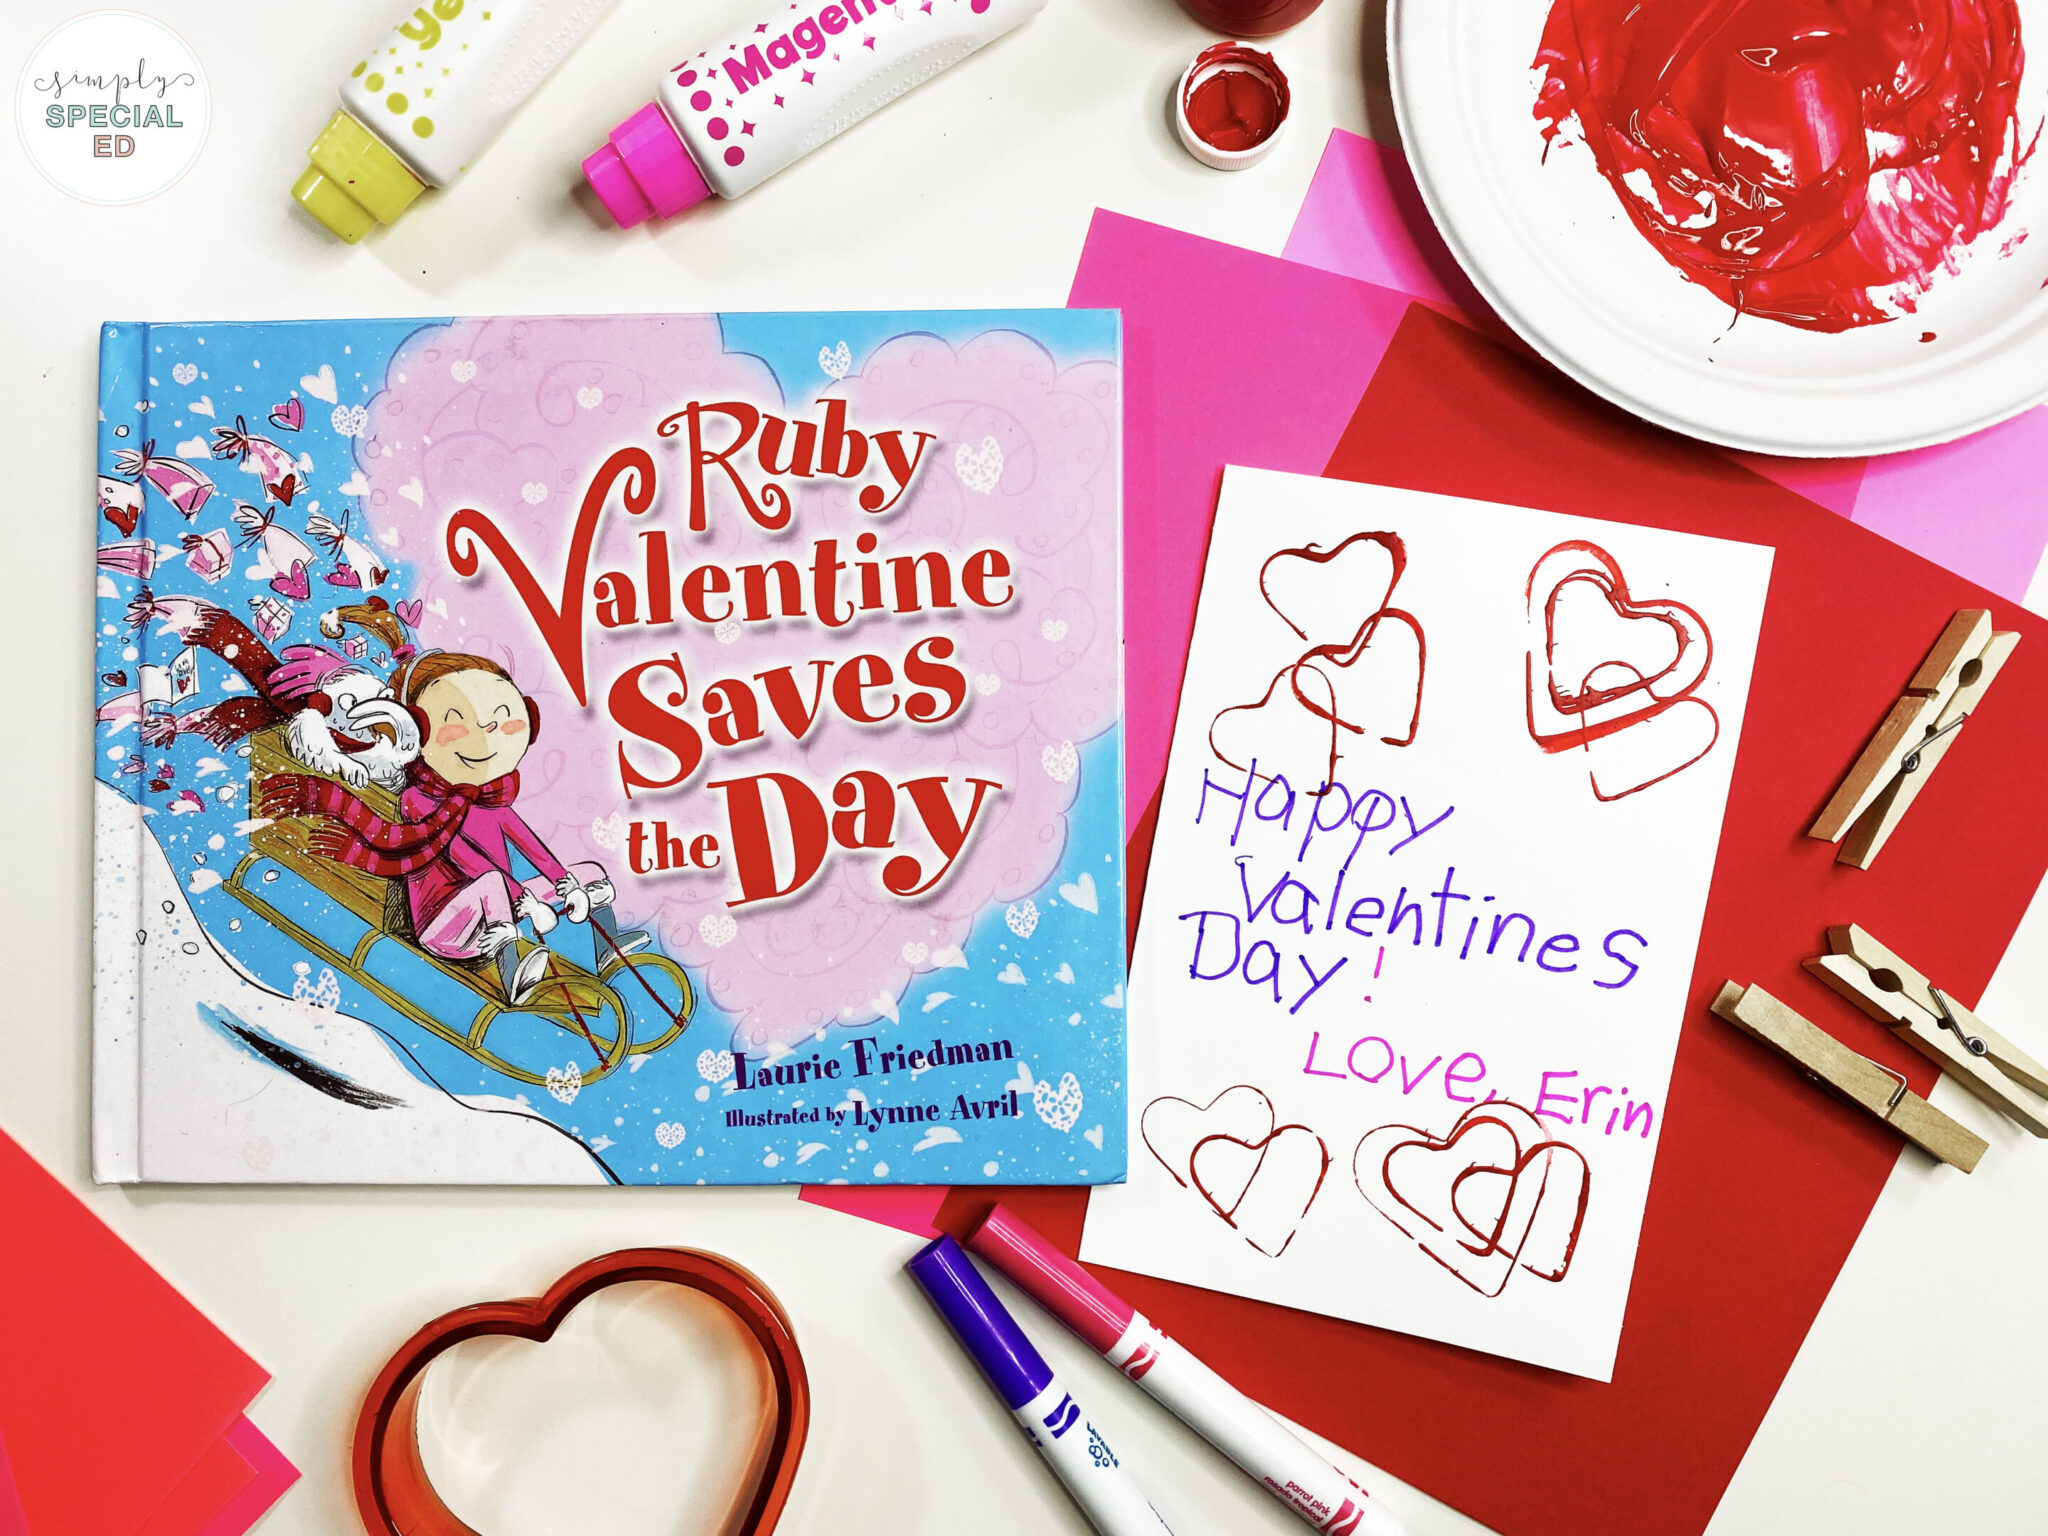 The perfect book activities for Valentine's Day! Ruby Valentine Saves the Day adapted book activities for special education classrooms.